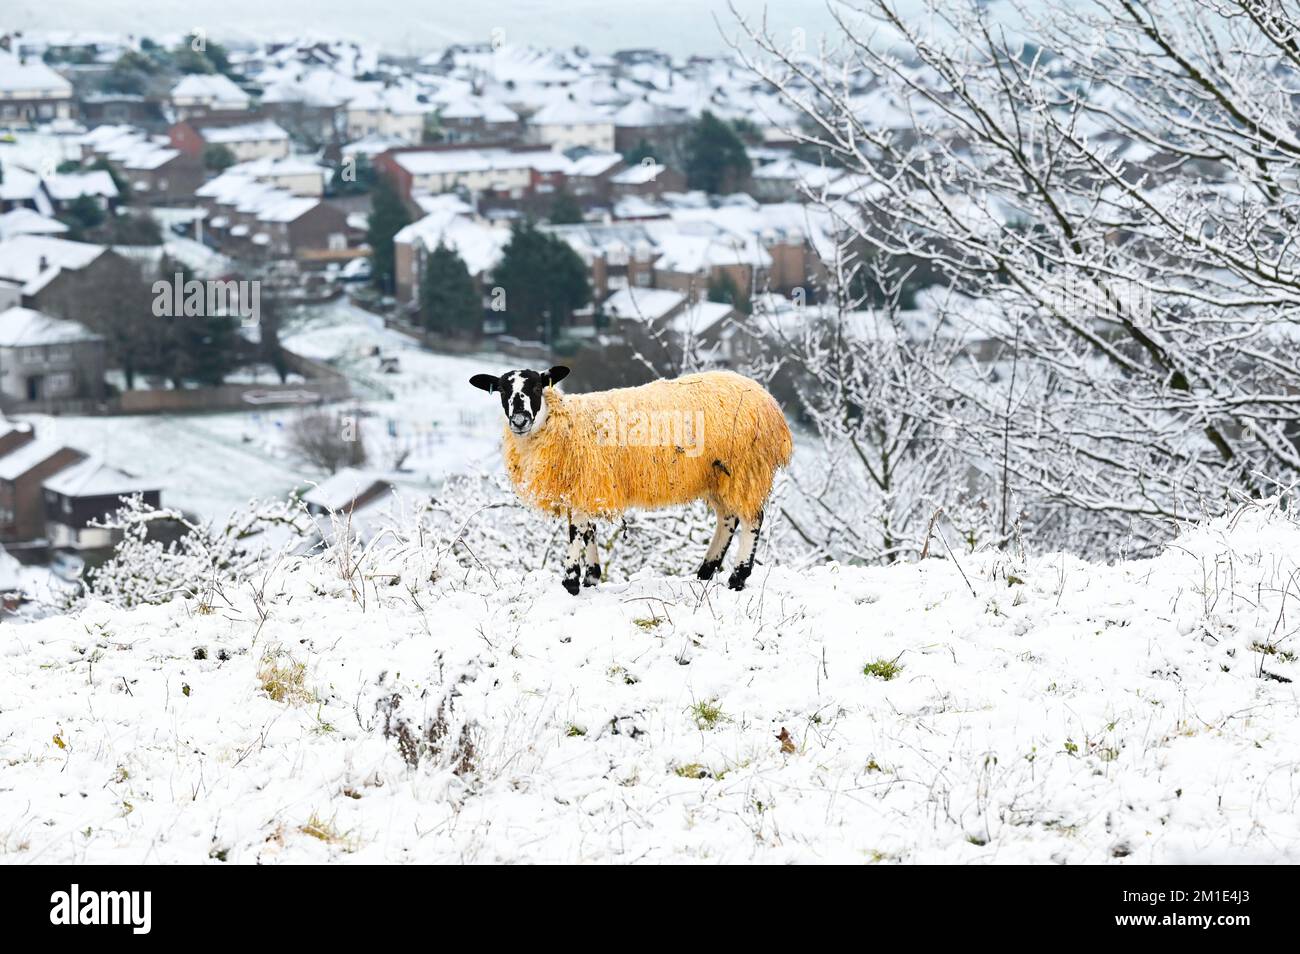 Brighton UK 12th December 2022 - Sheep graze in the snow near Brighton Racecourse this morning as the freezing weather is forecast to last for the next few days throughout Britain . : Credit Simon Dack / Alamy Live News Stock Photo